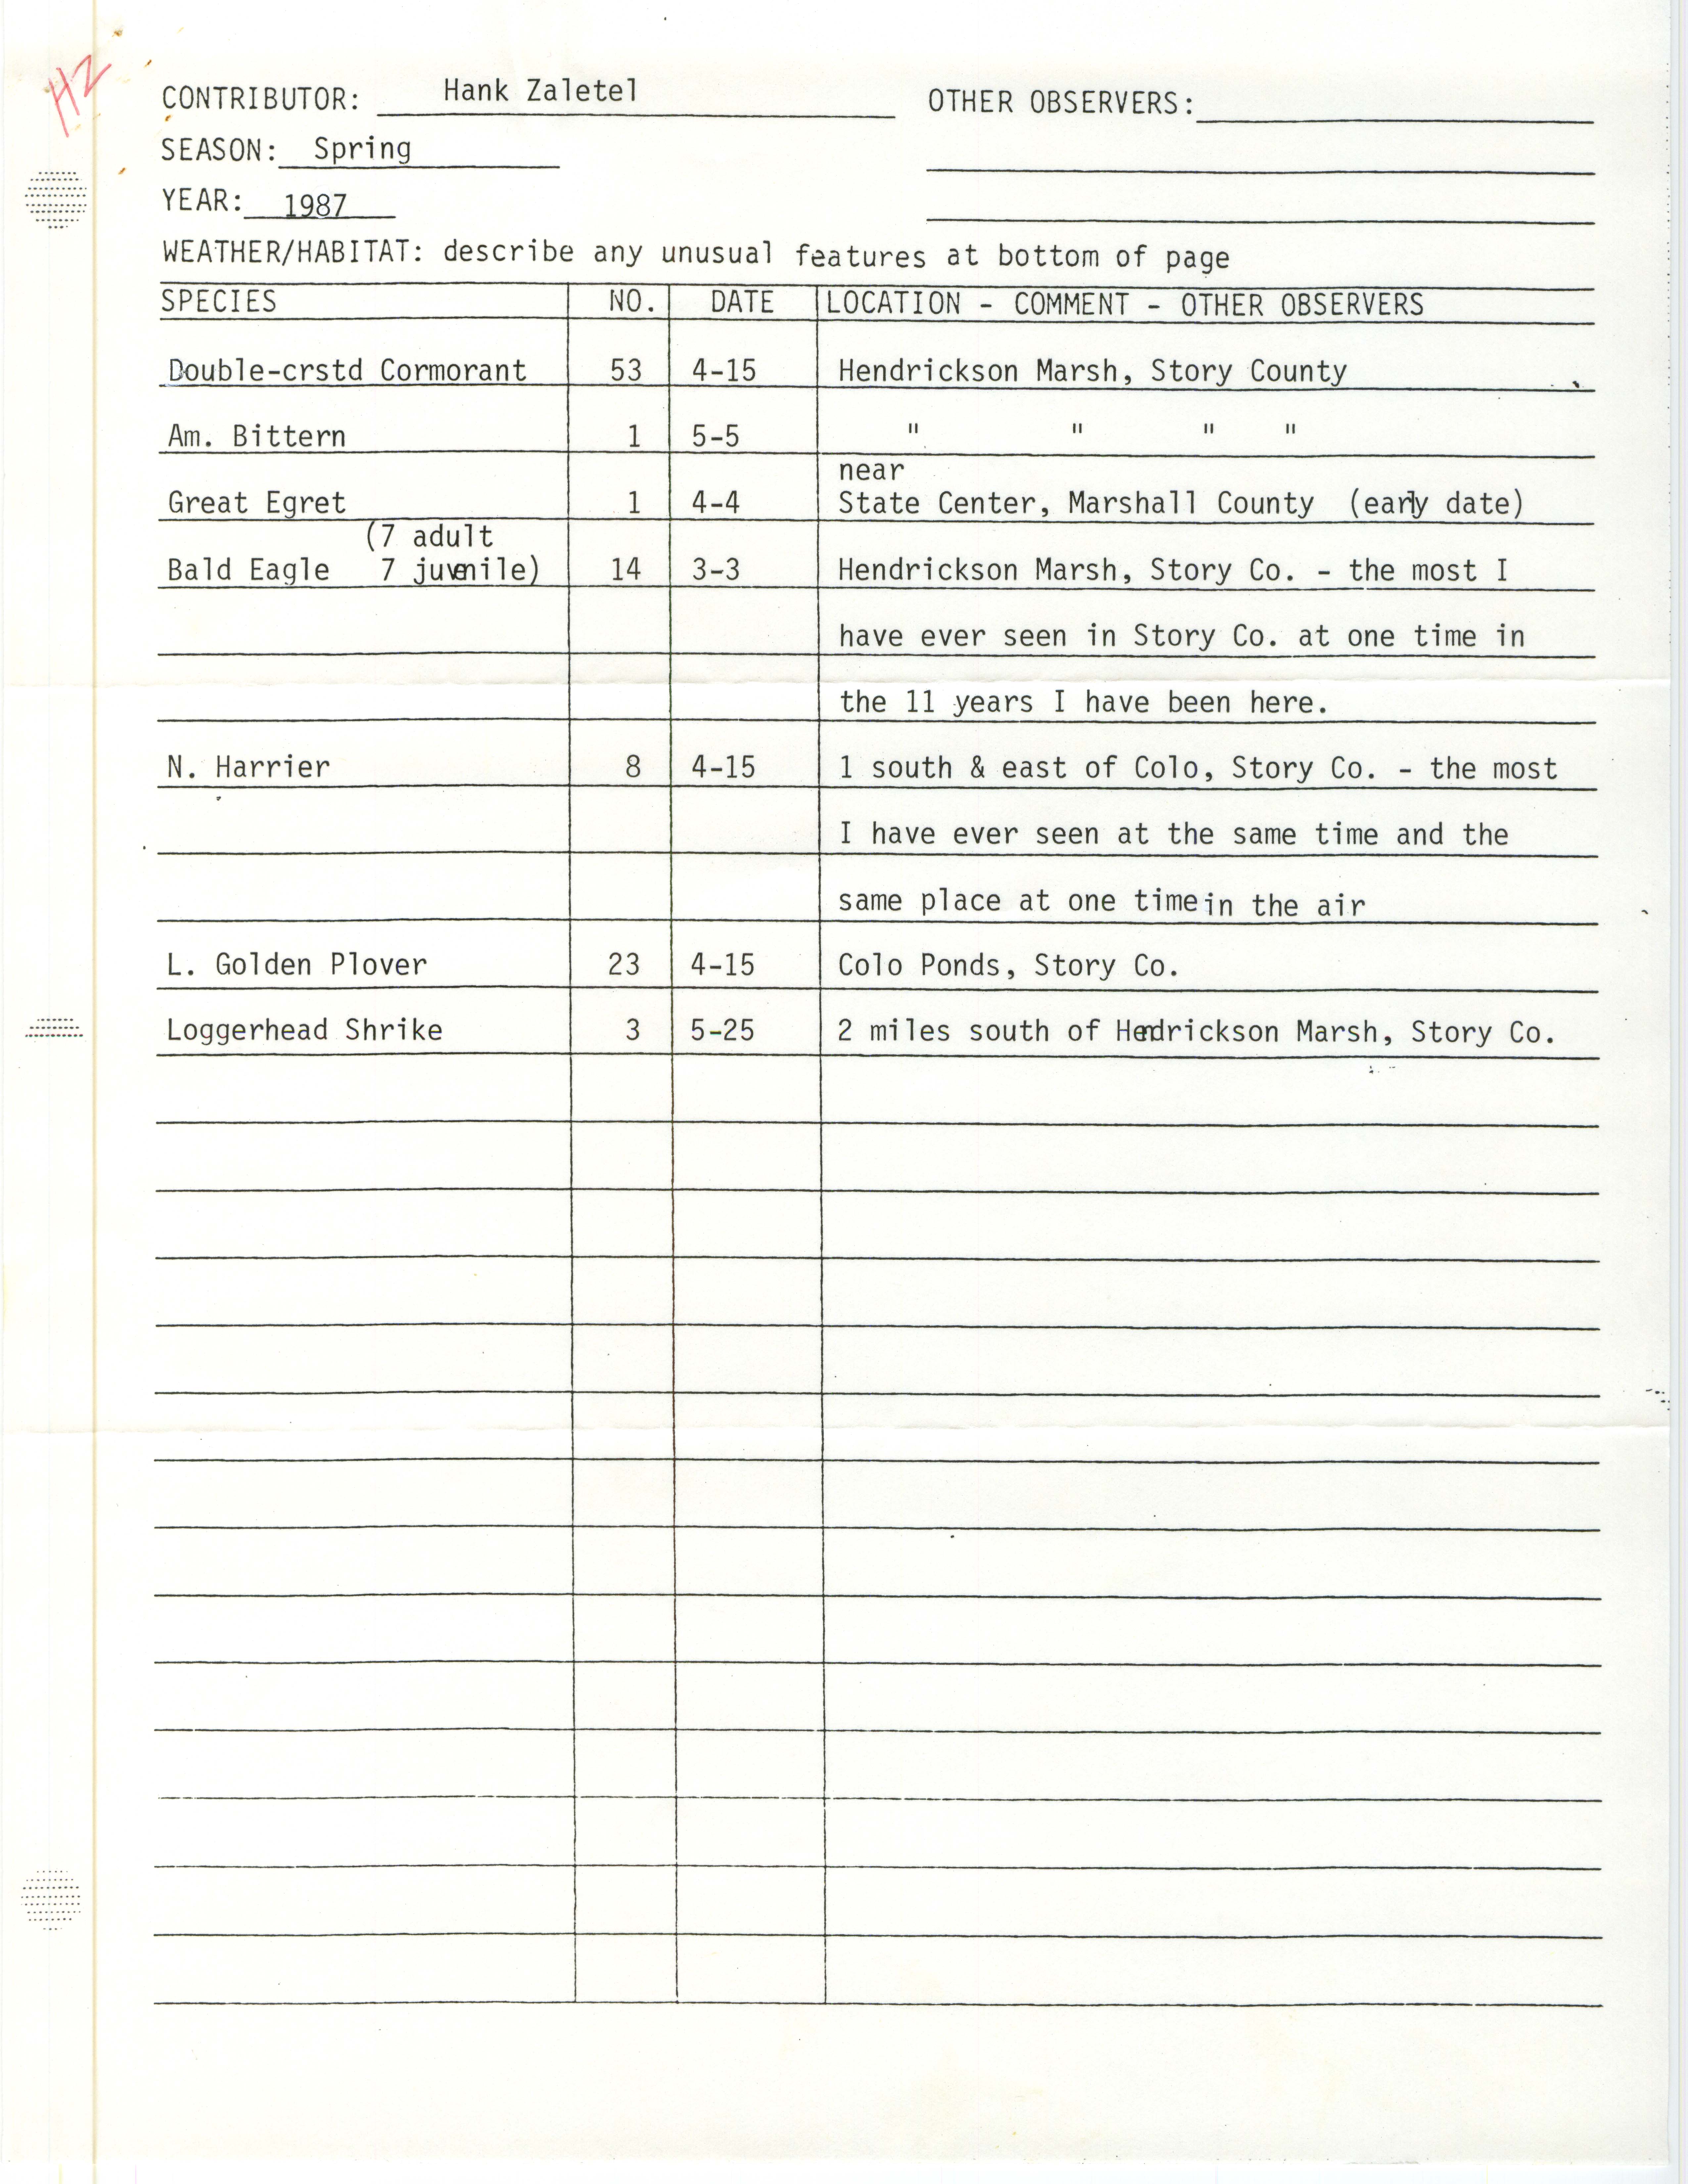 Field notes contributed by Hank Zaletel, spring 1987